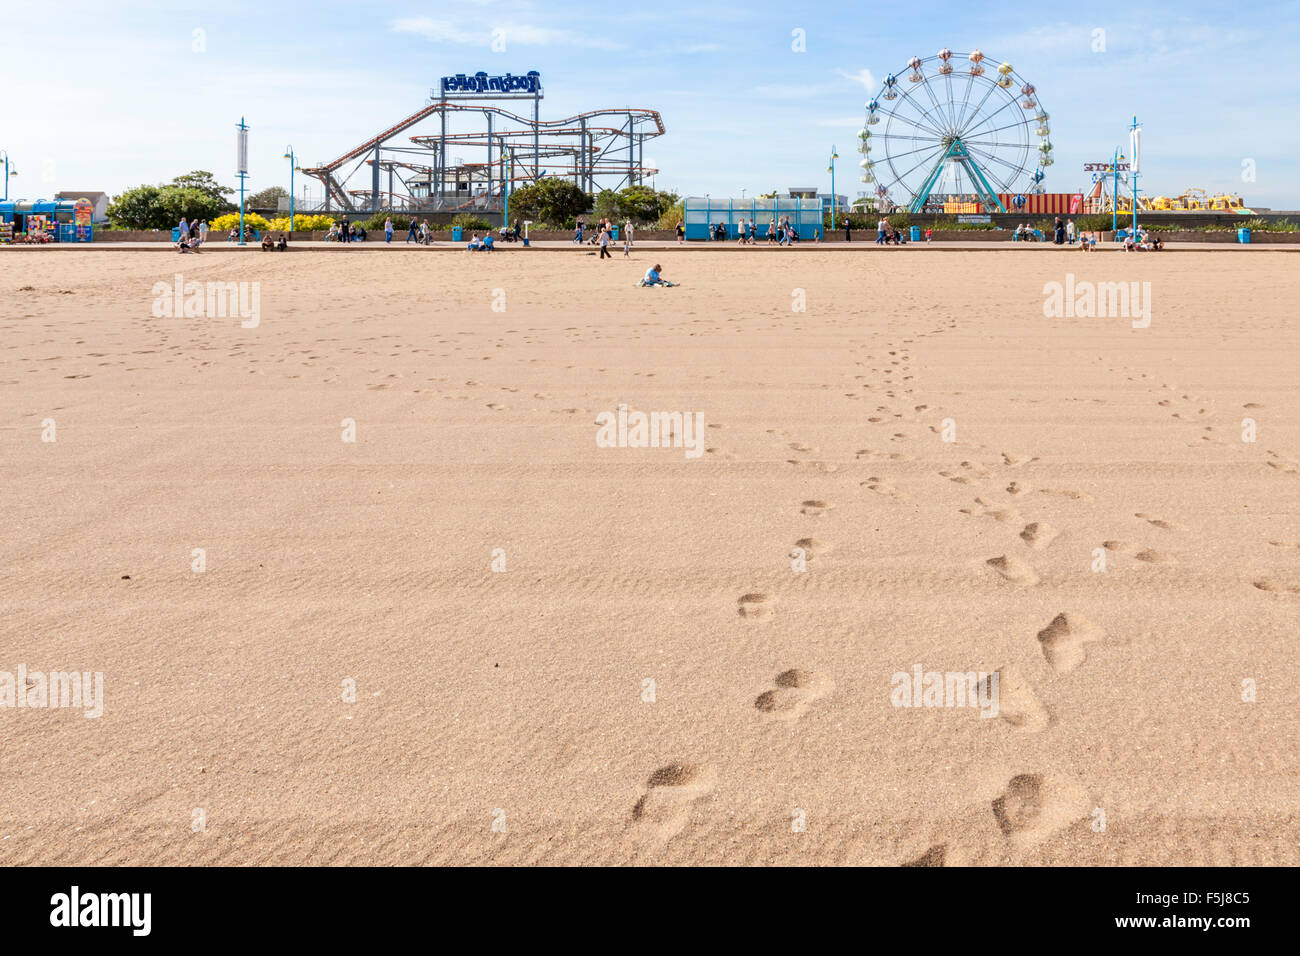 Footprints on the beach leading to the Pleasure Beach fairground at Skegness, Lincolnshire, England, UK Stock Photo